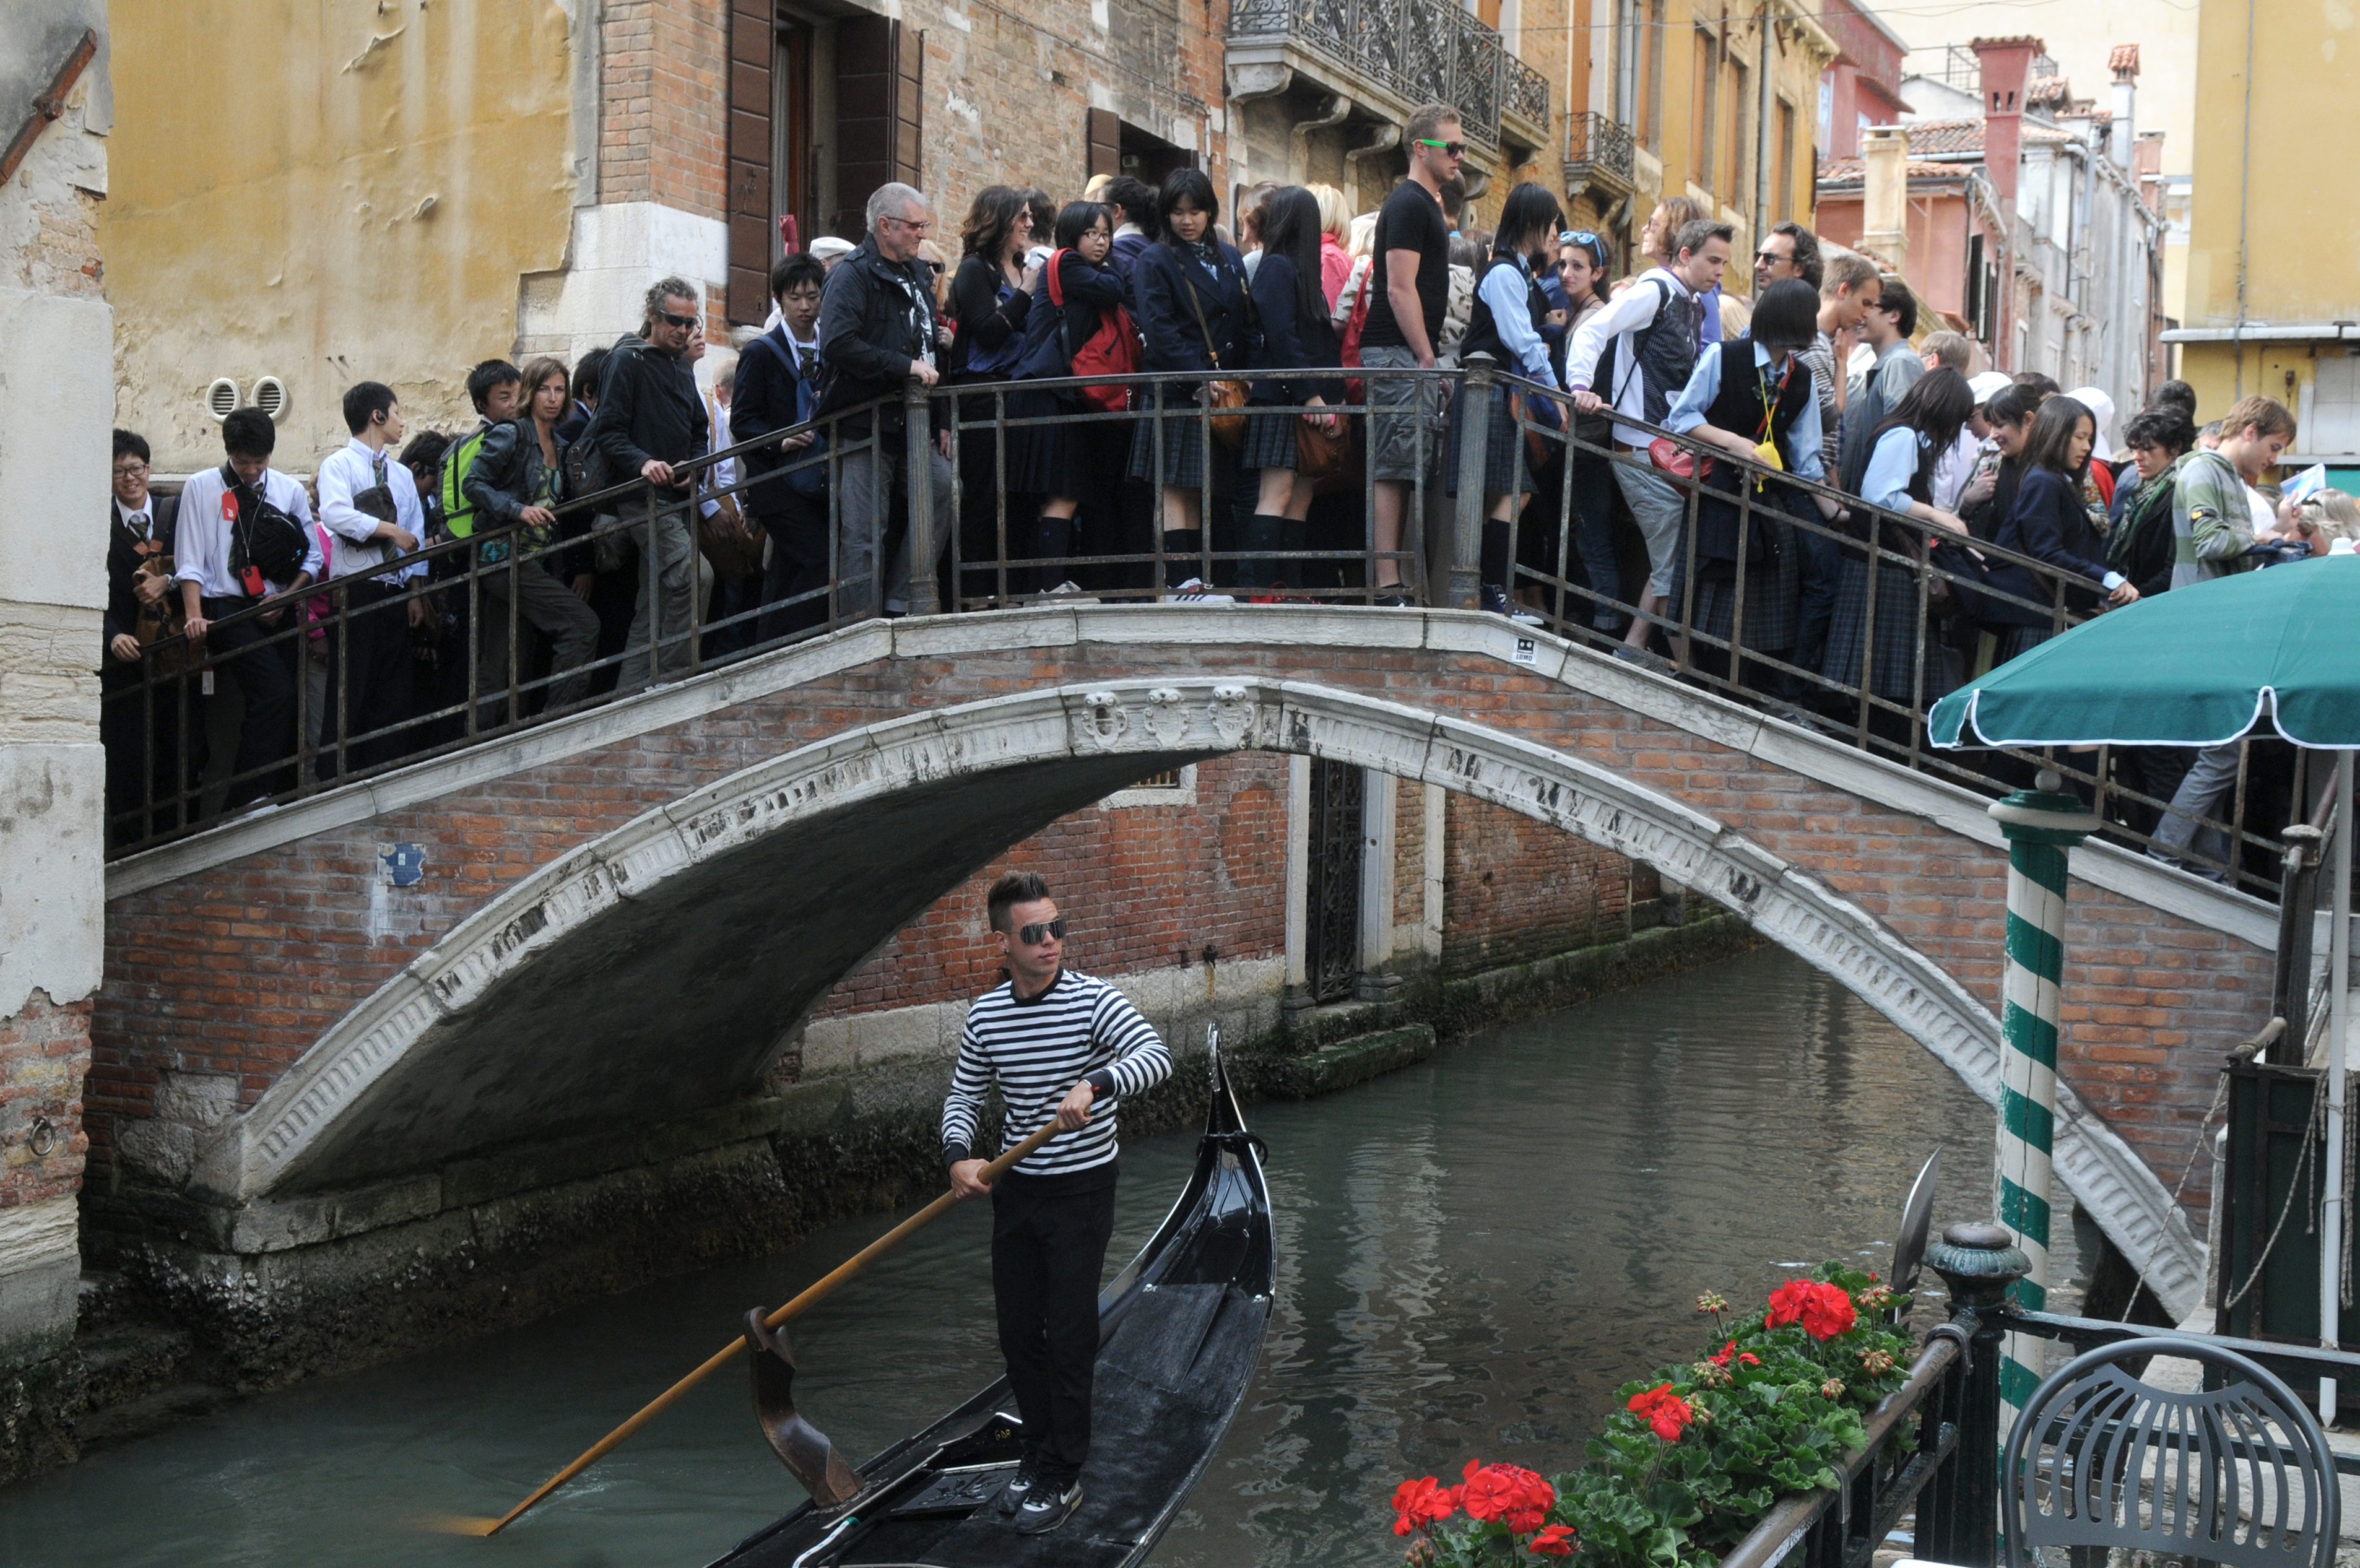 Tourists in the crowded the bridge in Venice.